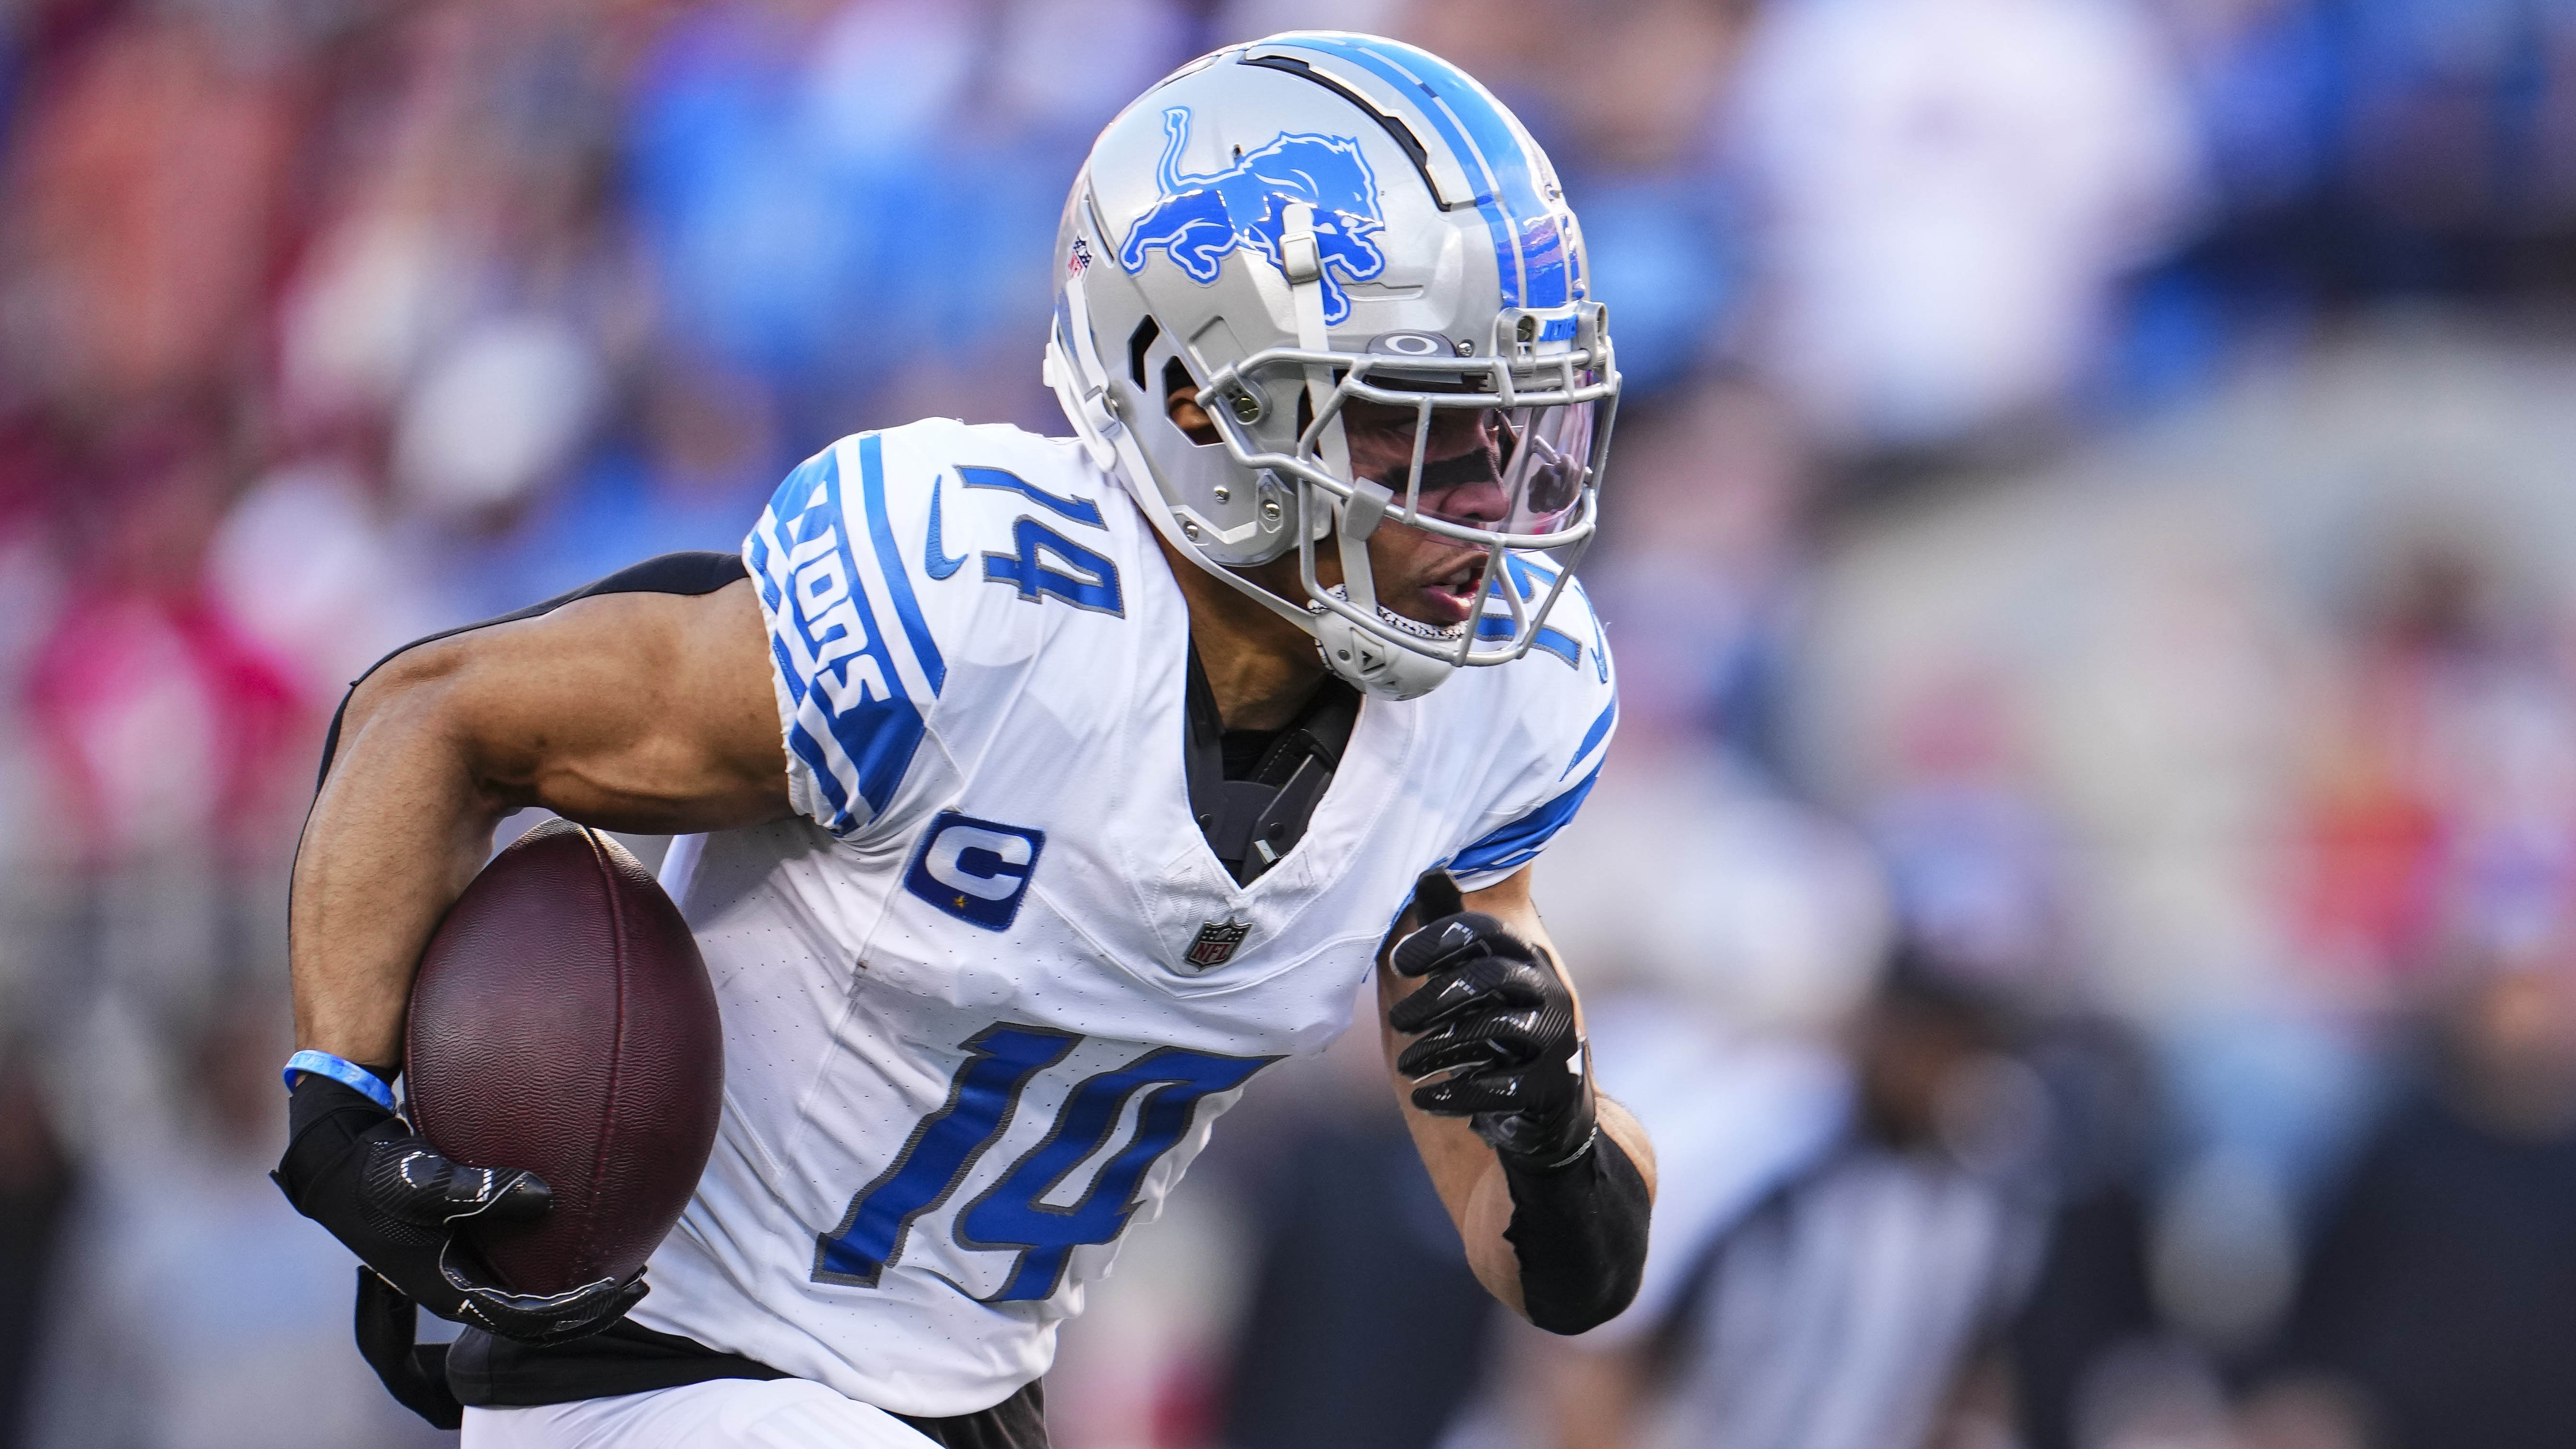 Report: Amon-Ra St. Brown becomes highest-paid WR after 4-year
extension with Lions